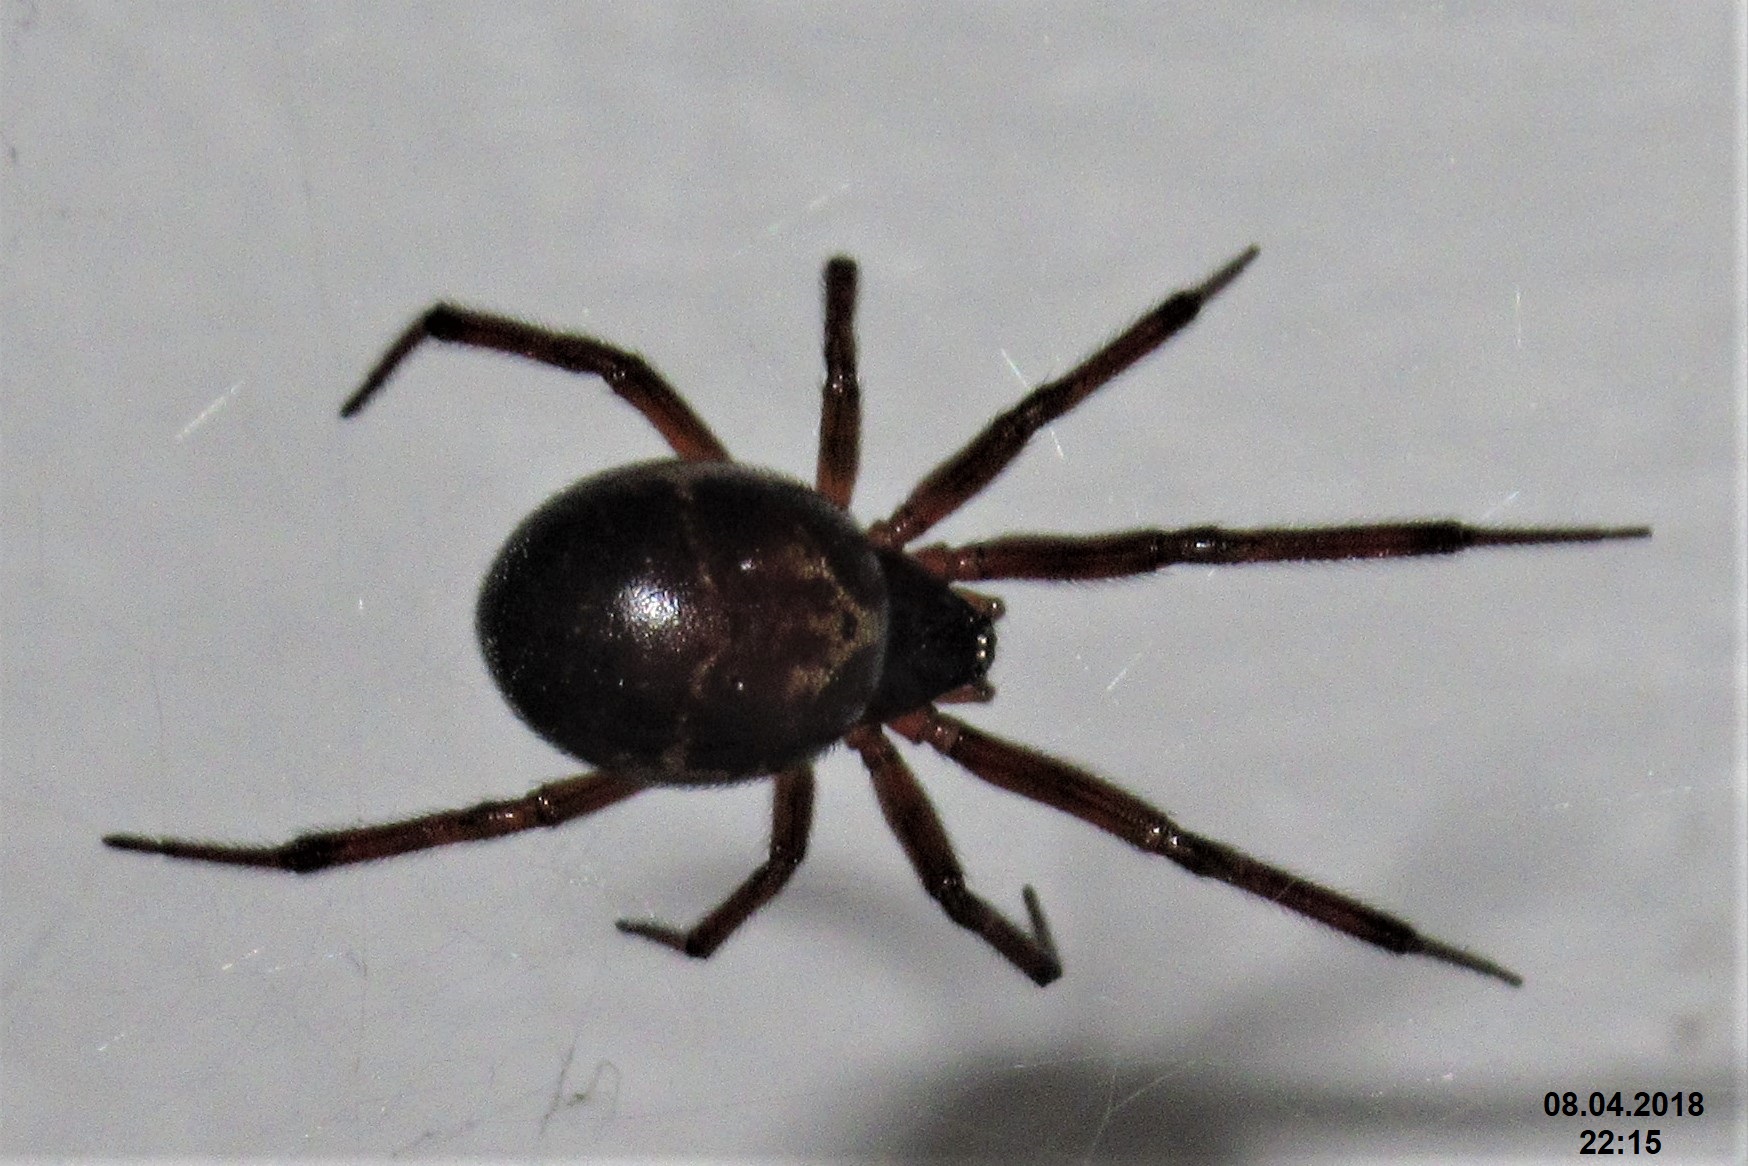 A noble false widow spider is in front of a gray surface. 